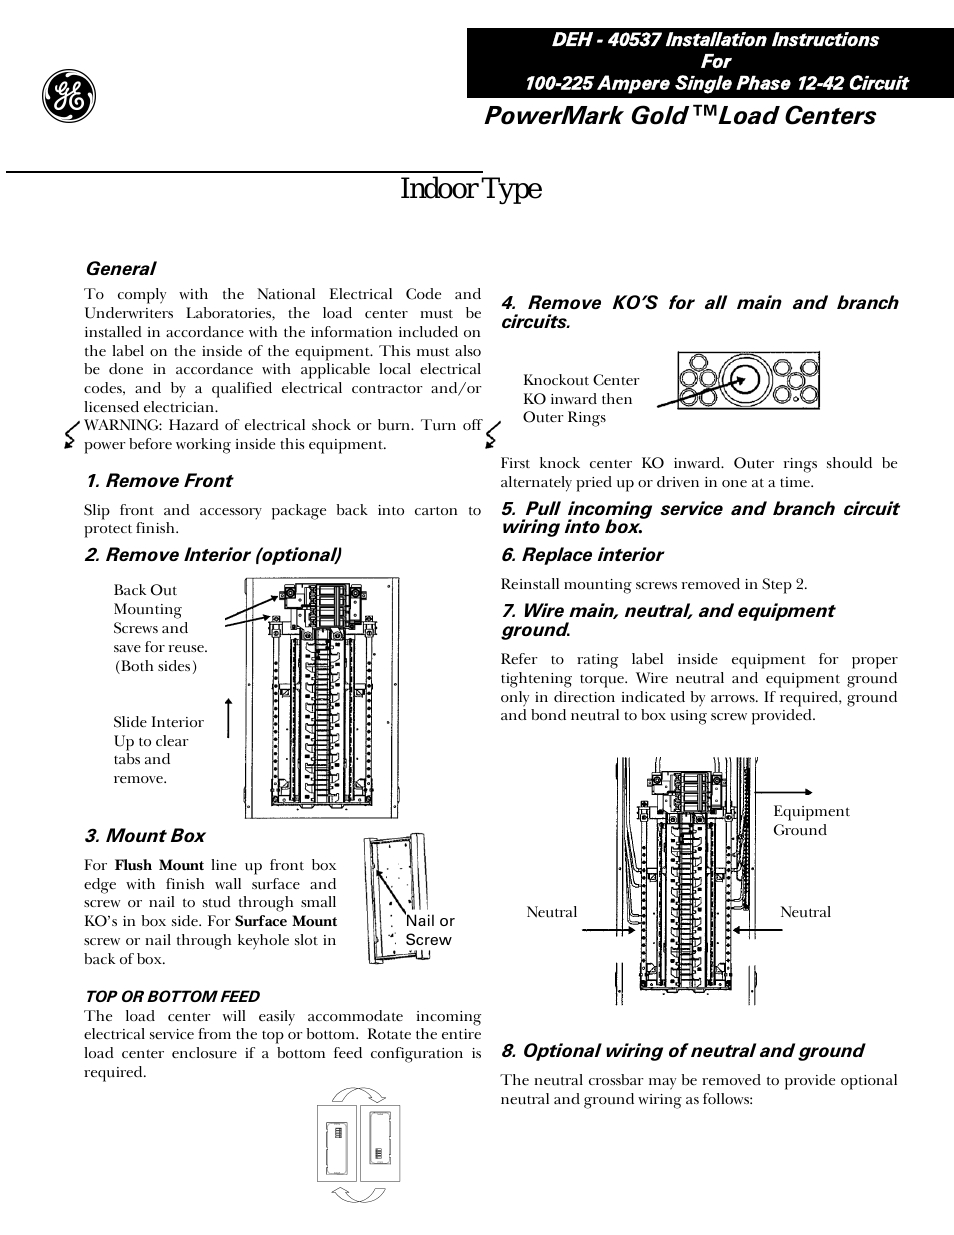 Ge Industrial Solutions Power Mark Gold Load Centers User Manual | 4 - Ge Powermark Gold Load Center Wiring Diagram